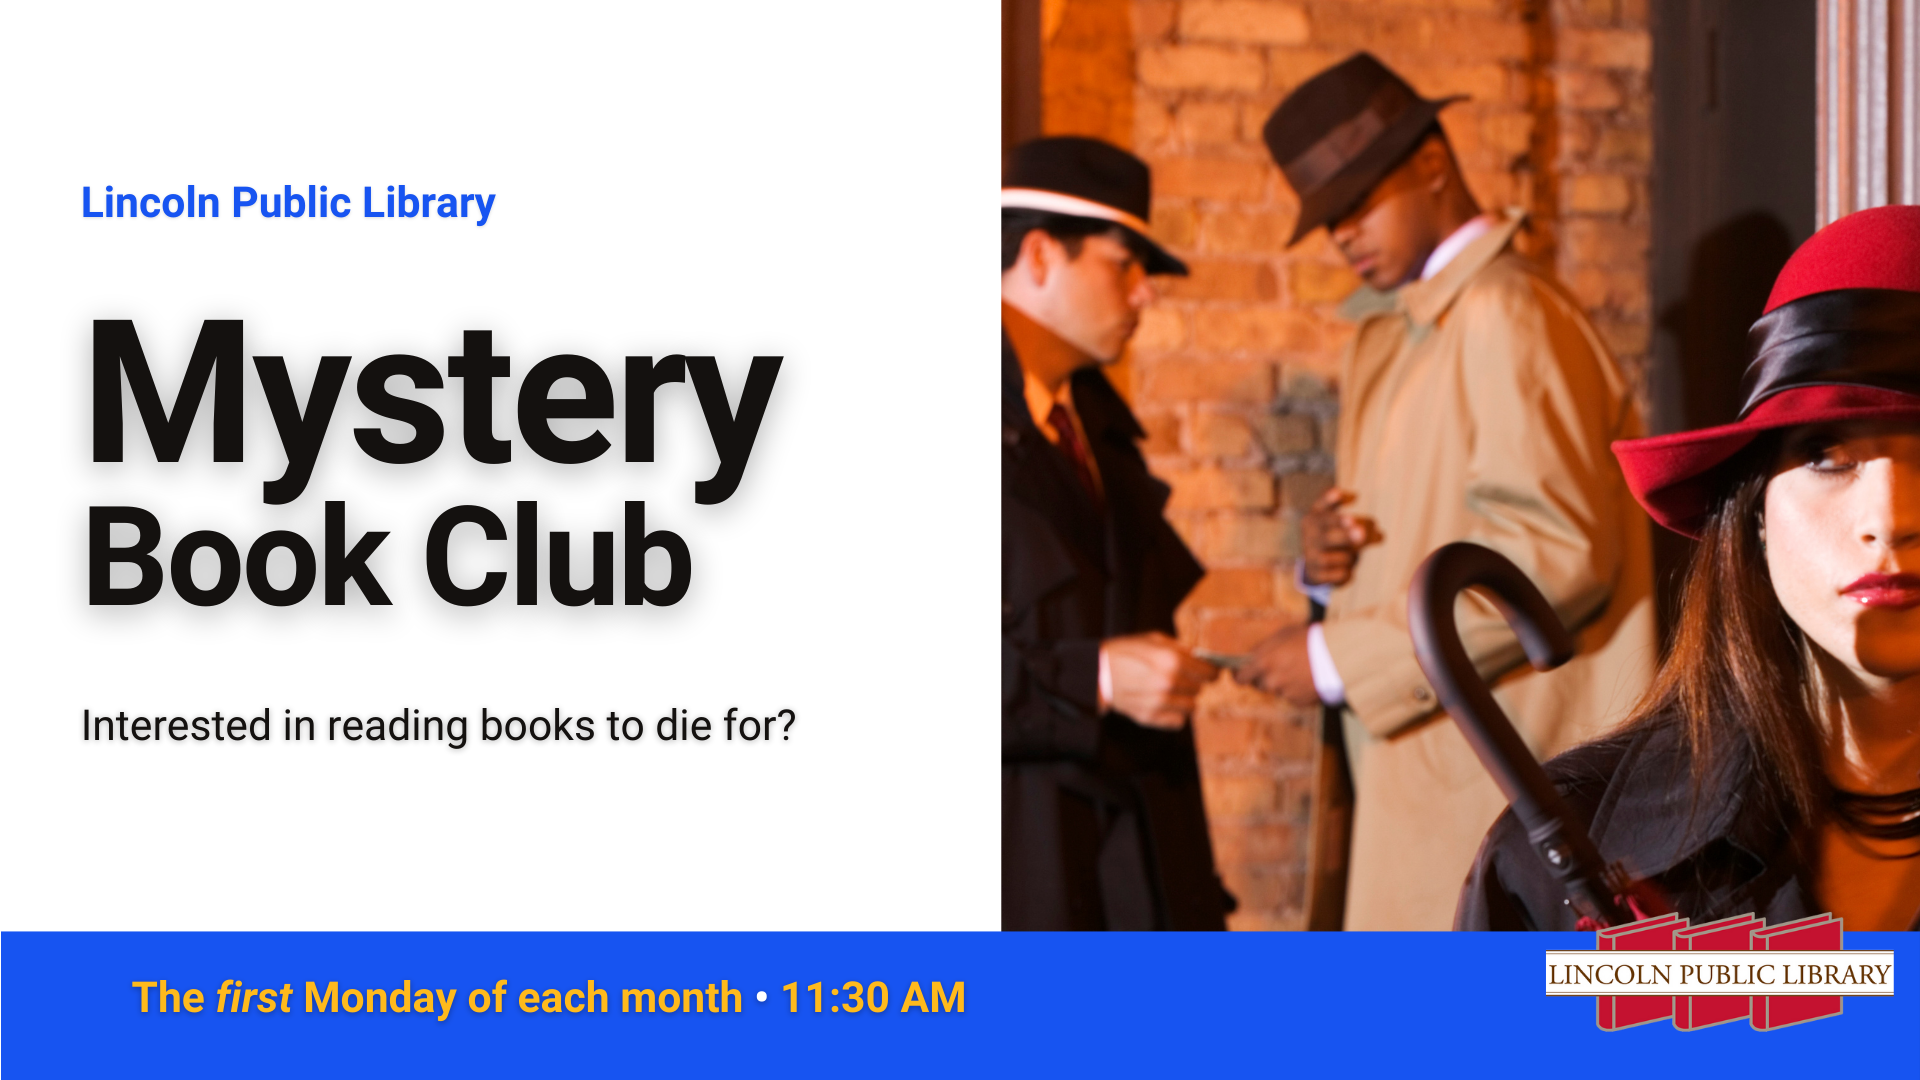 Lincoln Public Library Mystery Book Club. Interested in reading books to die for? The first Monday of each month at 11:30 AM